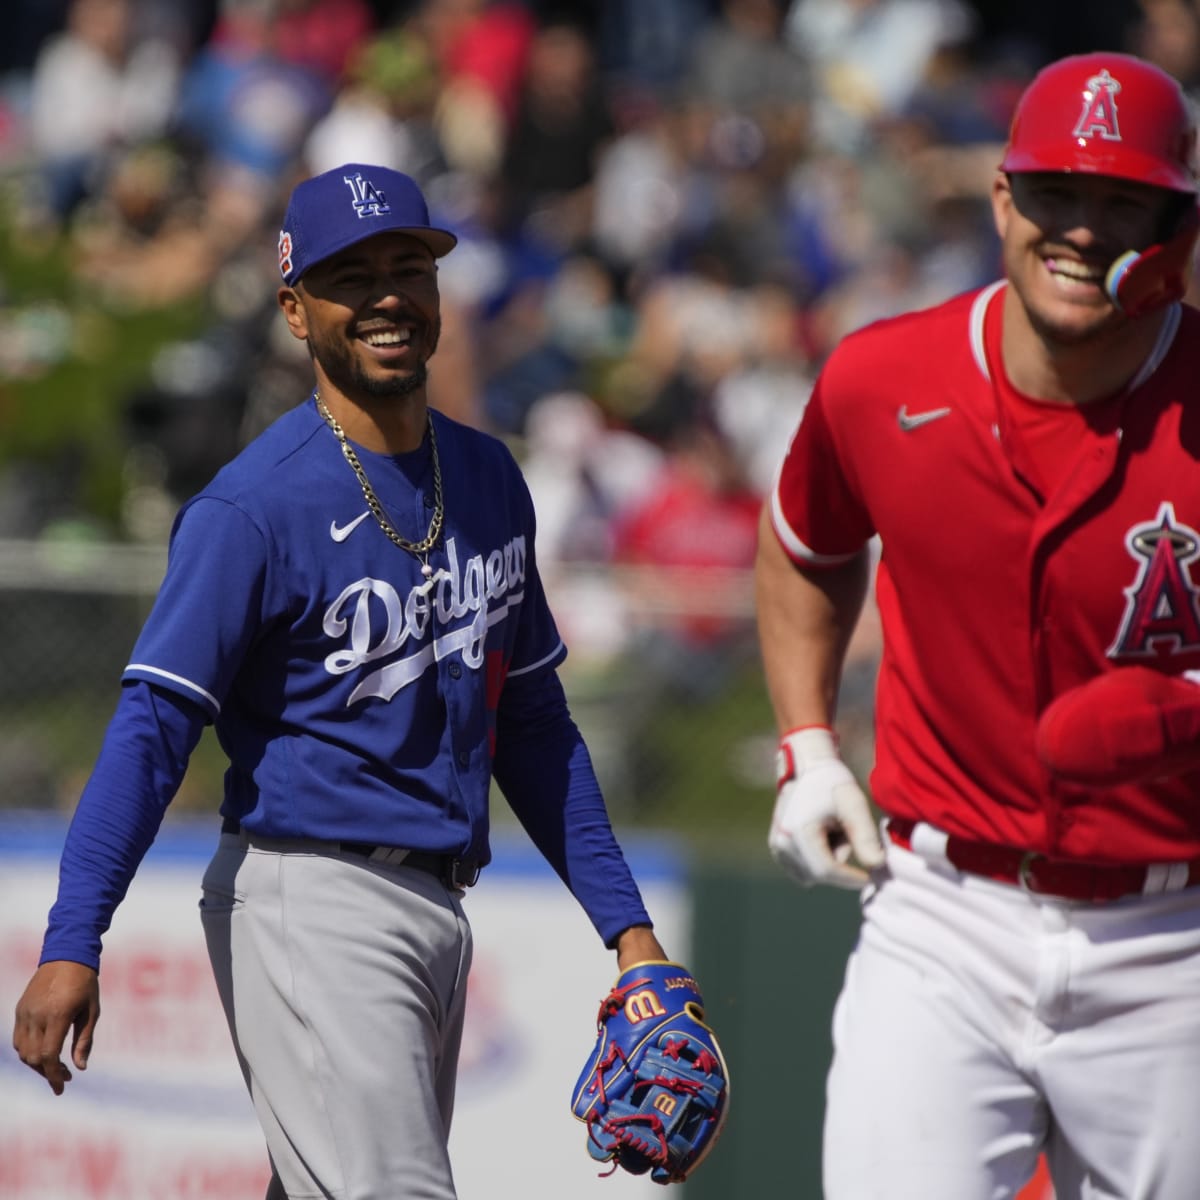 Kiké Hernández's jersey outsells Mike Trout's - Los Angeles Times